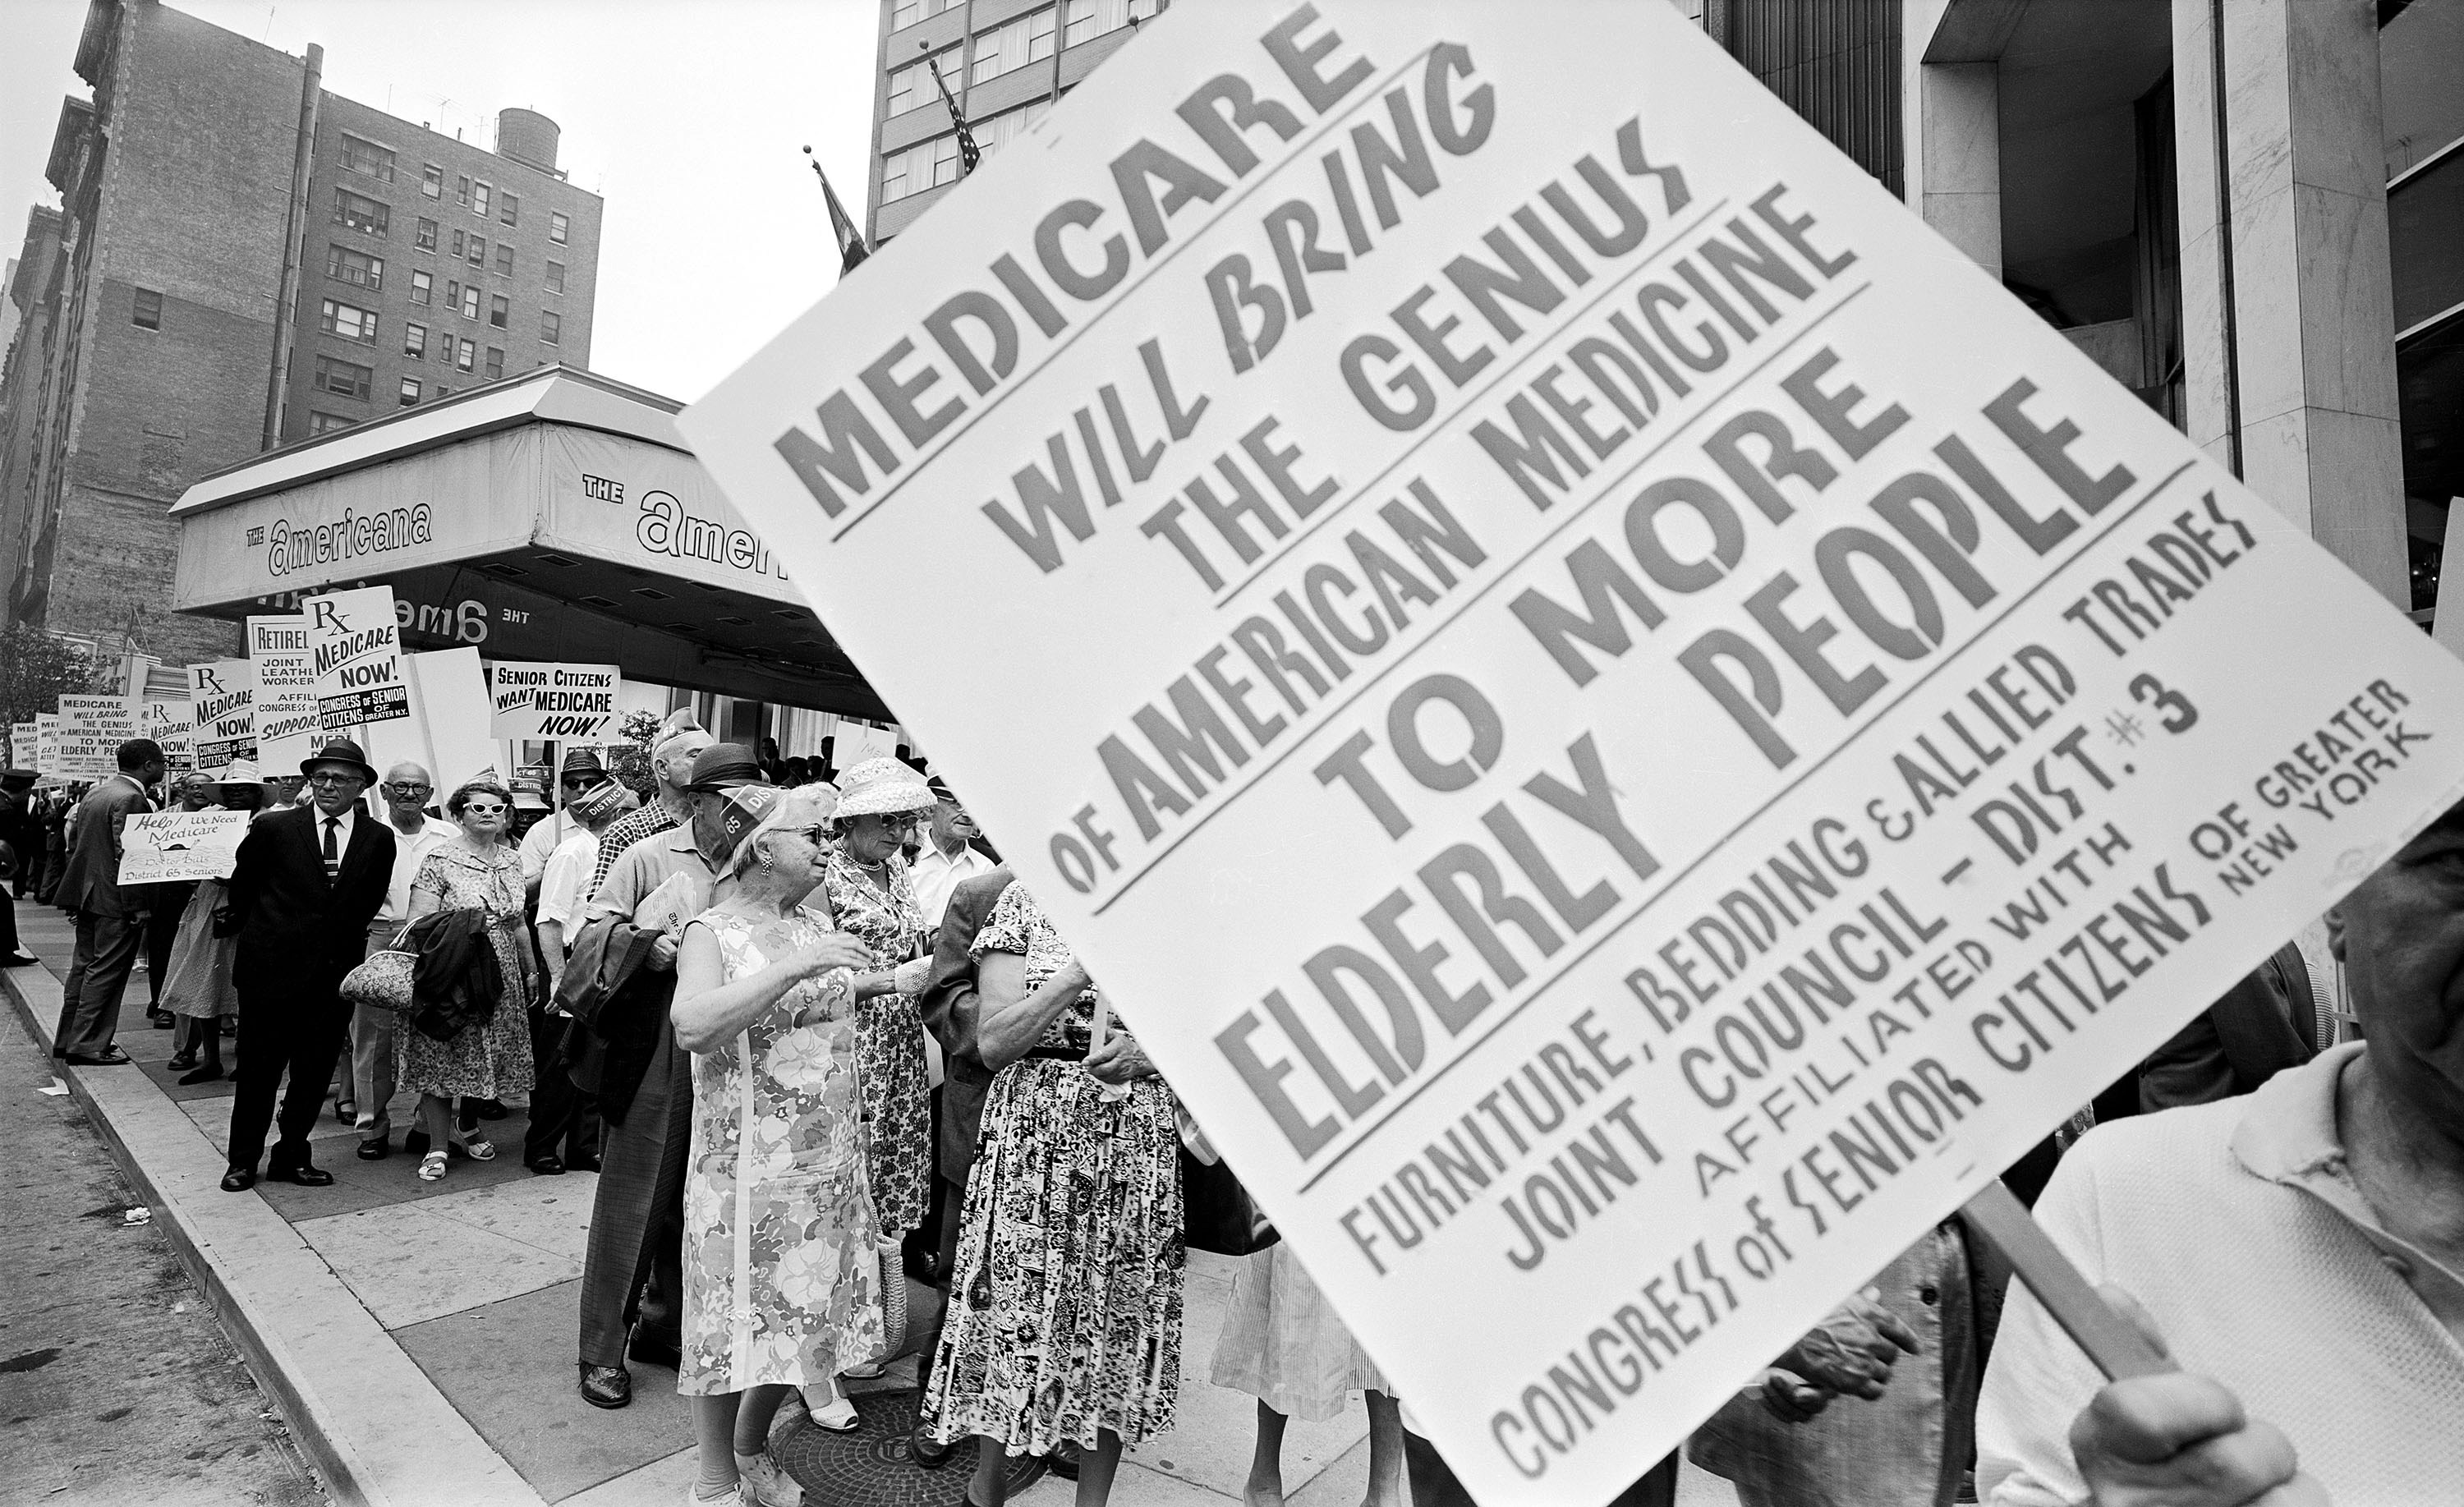 Retired Senior Citizens Carrying Pro-Medicare Signs